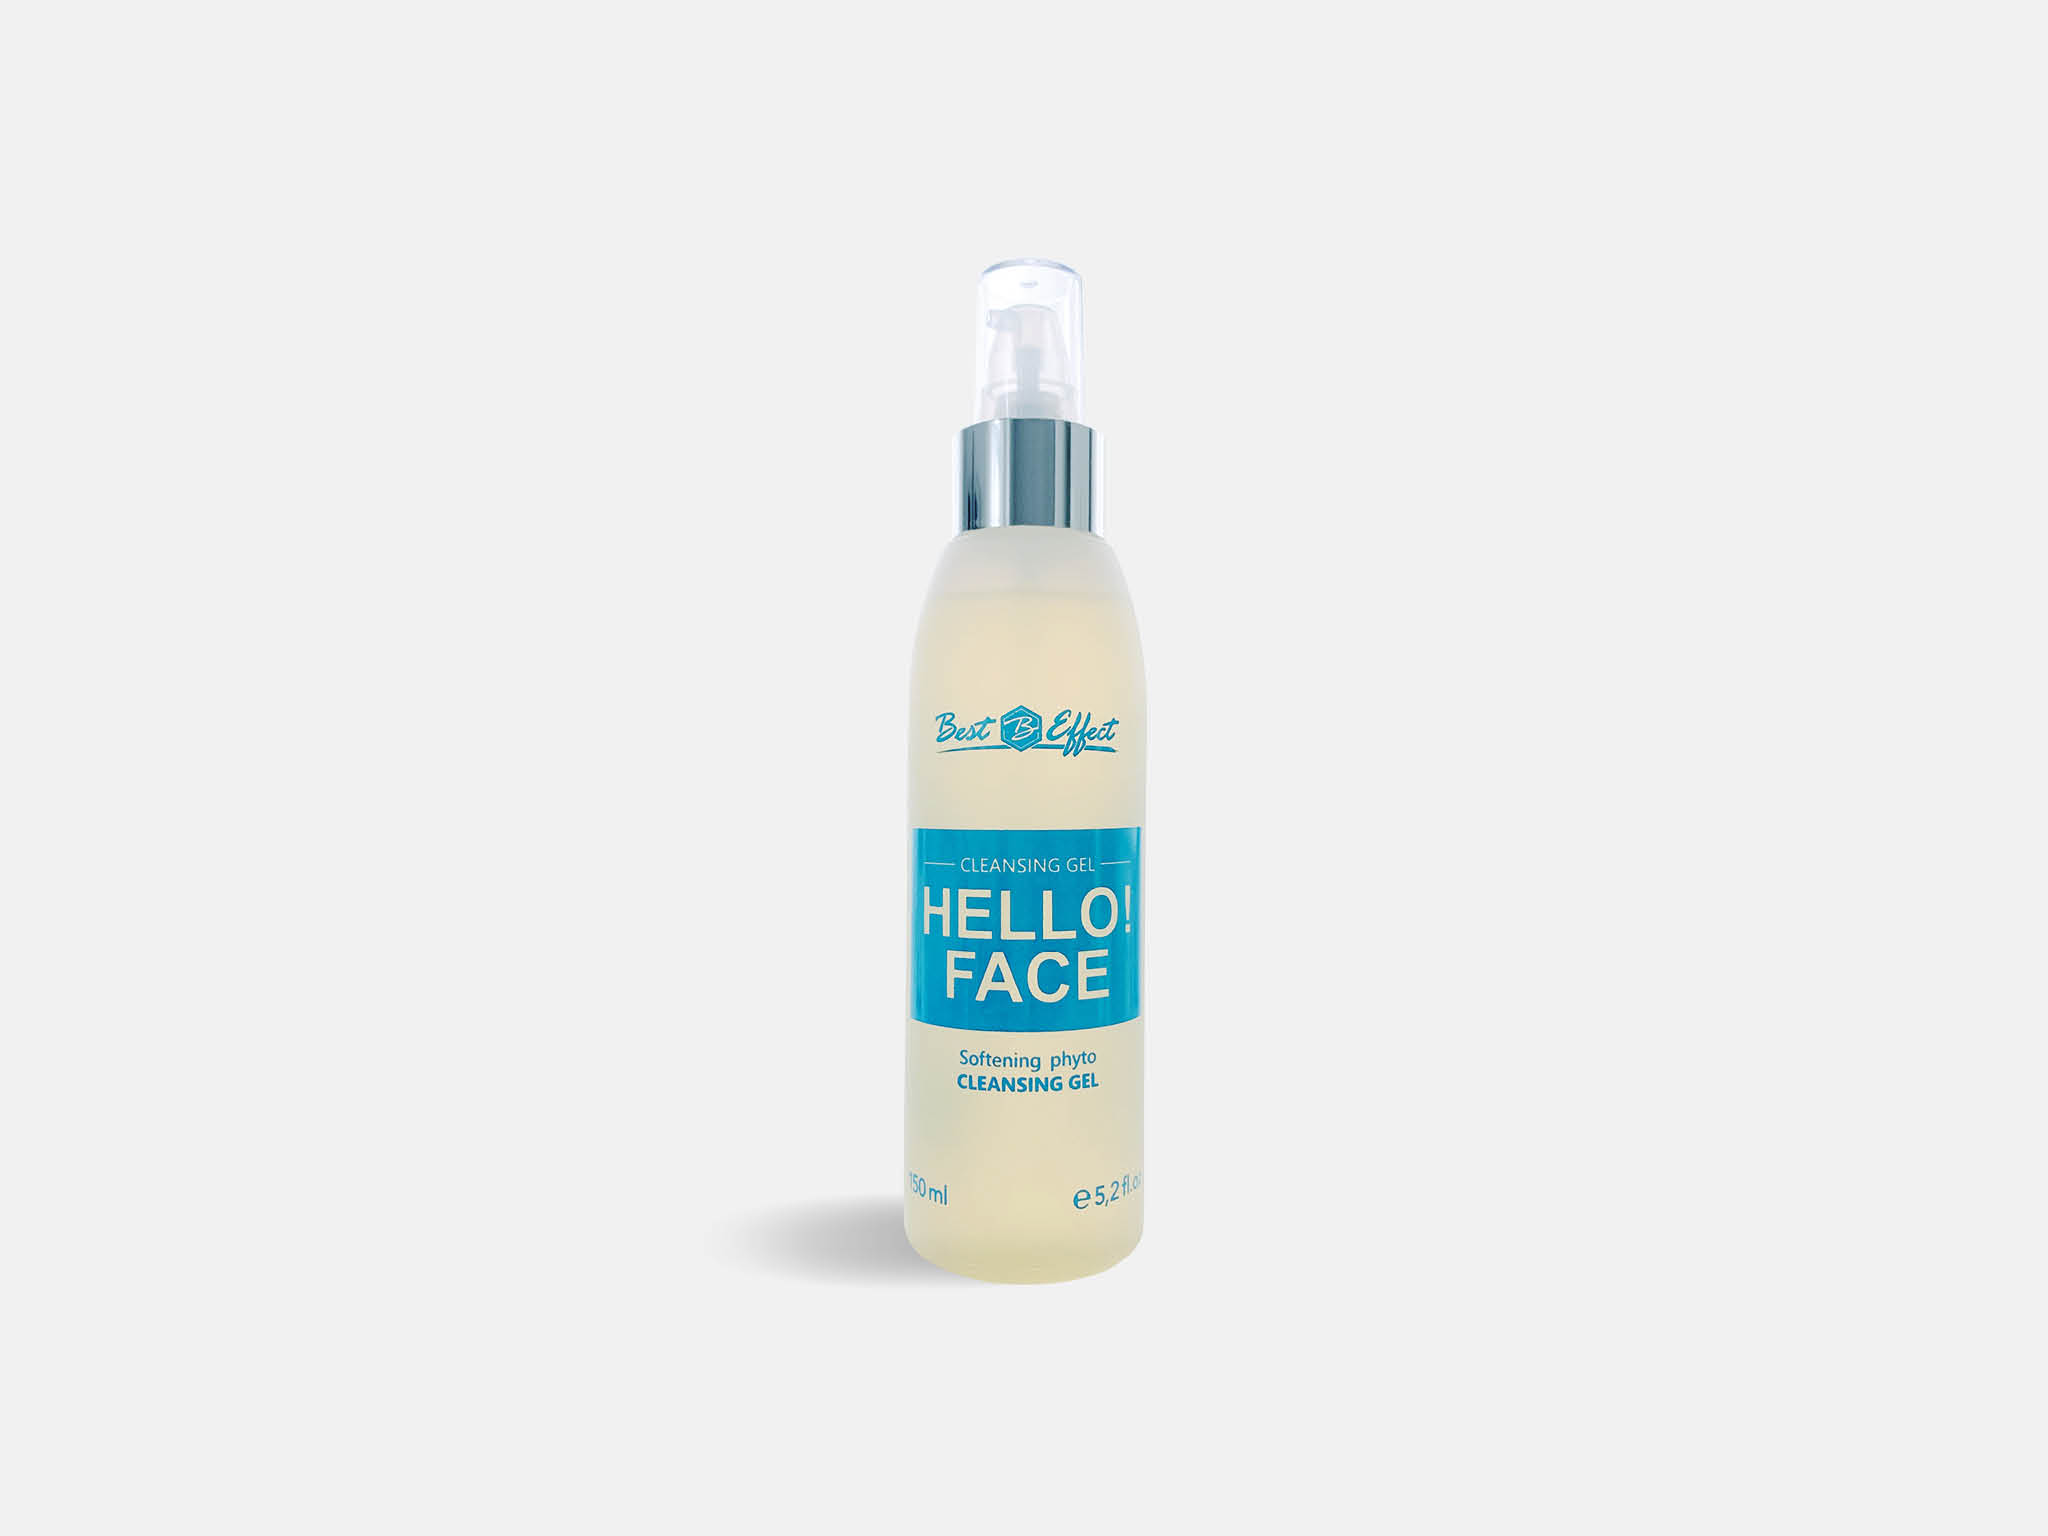 Hello!Face cleansing gel